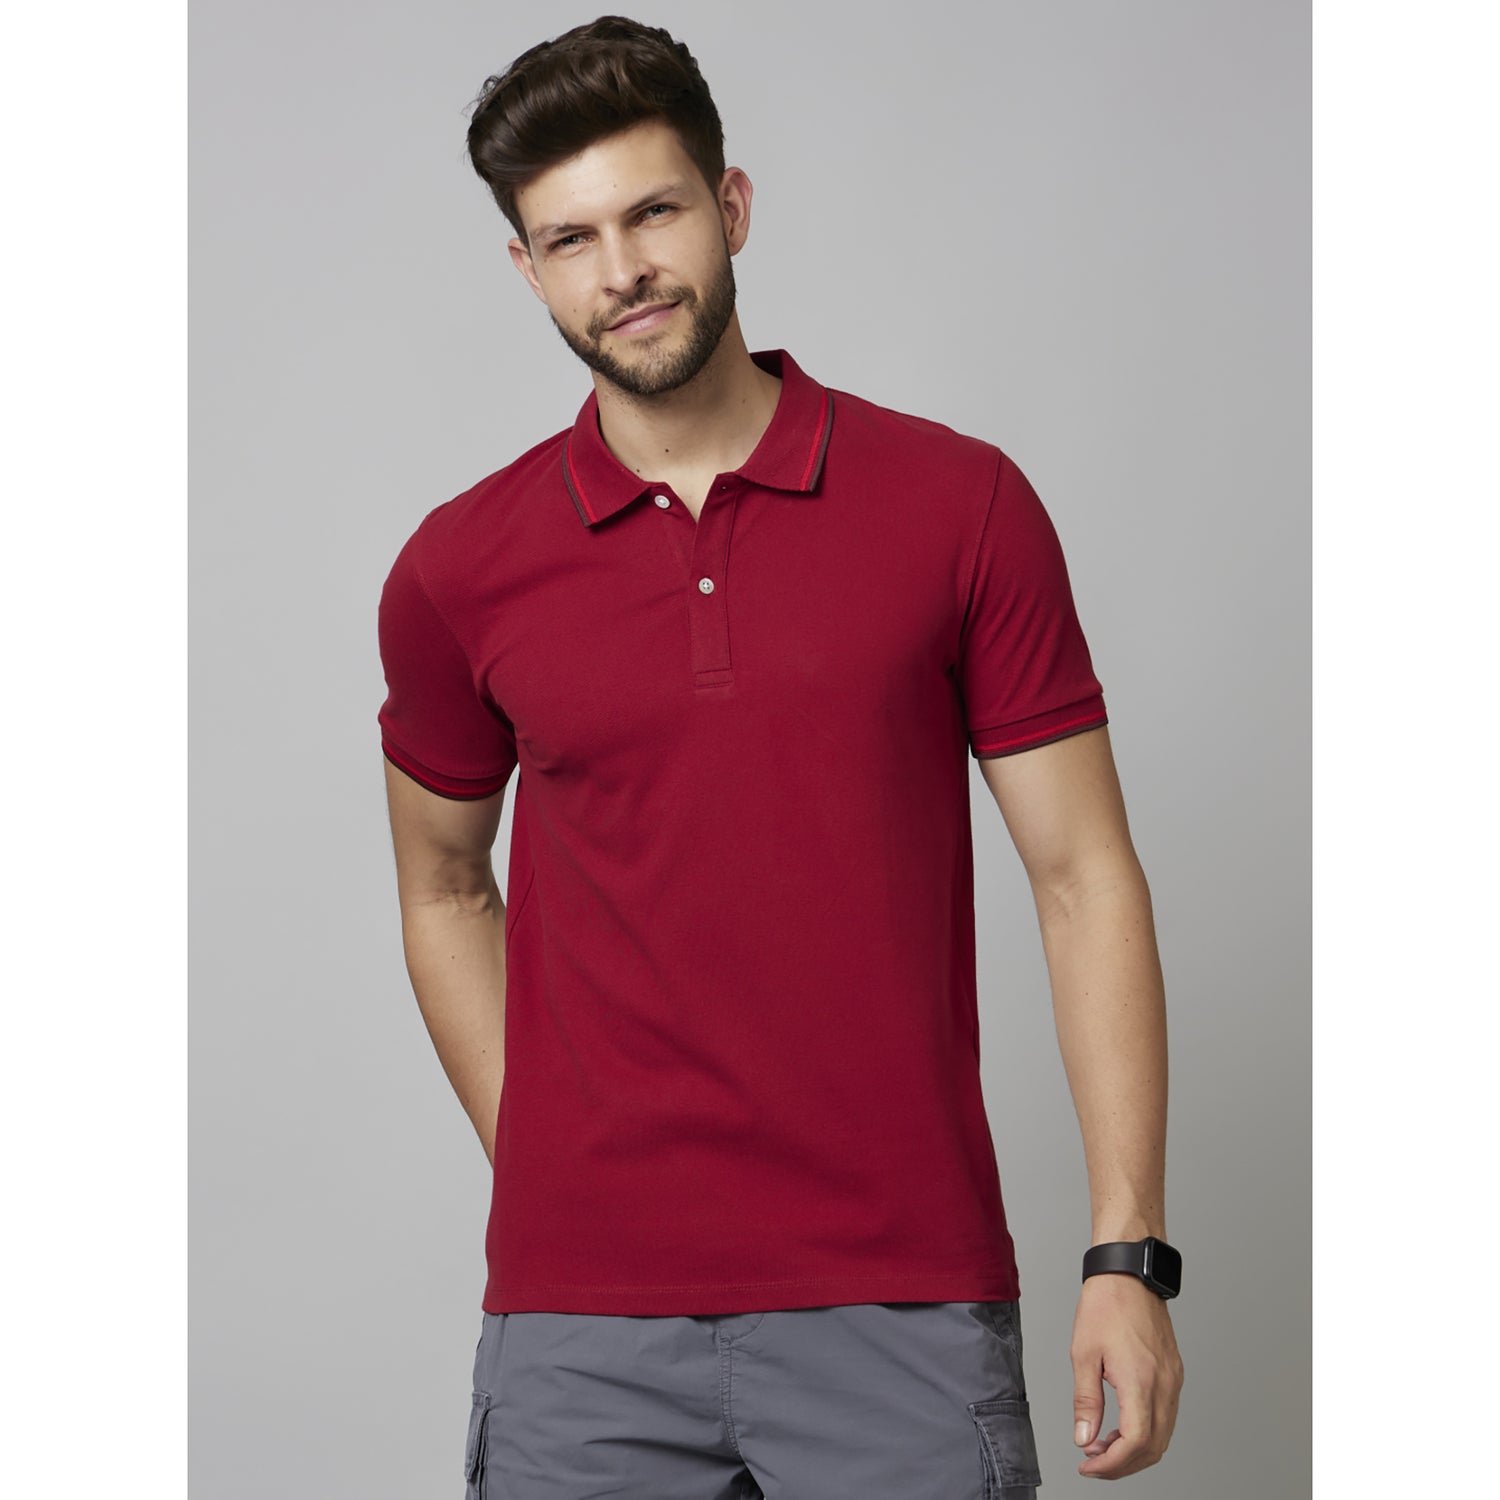 Red Solid Short Sleeve Cotton Blend T-Shirts (DECOLRAYEB2)